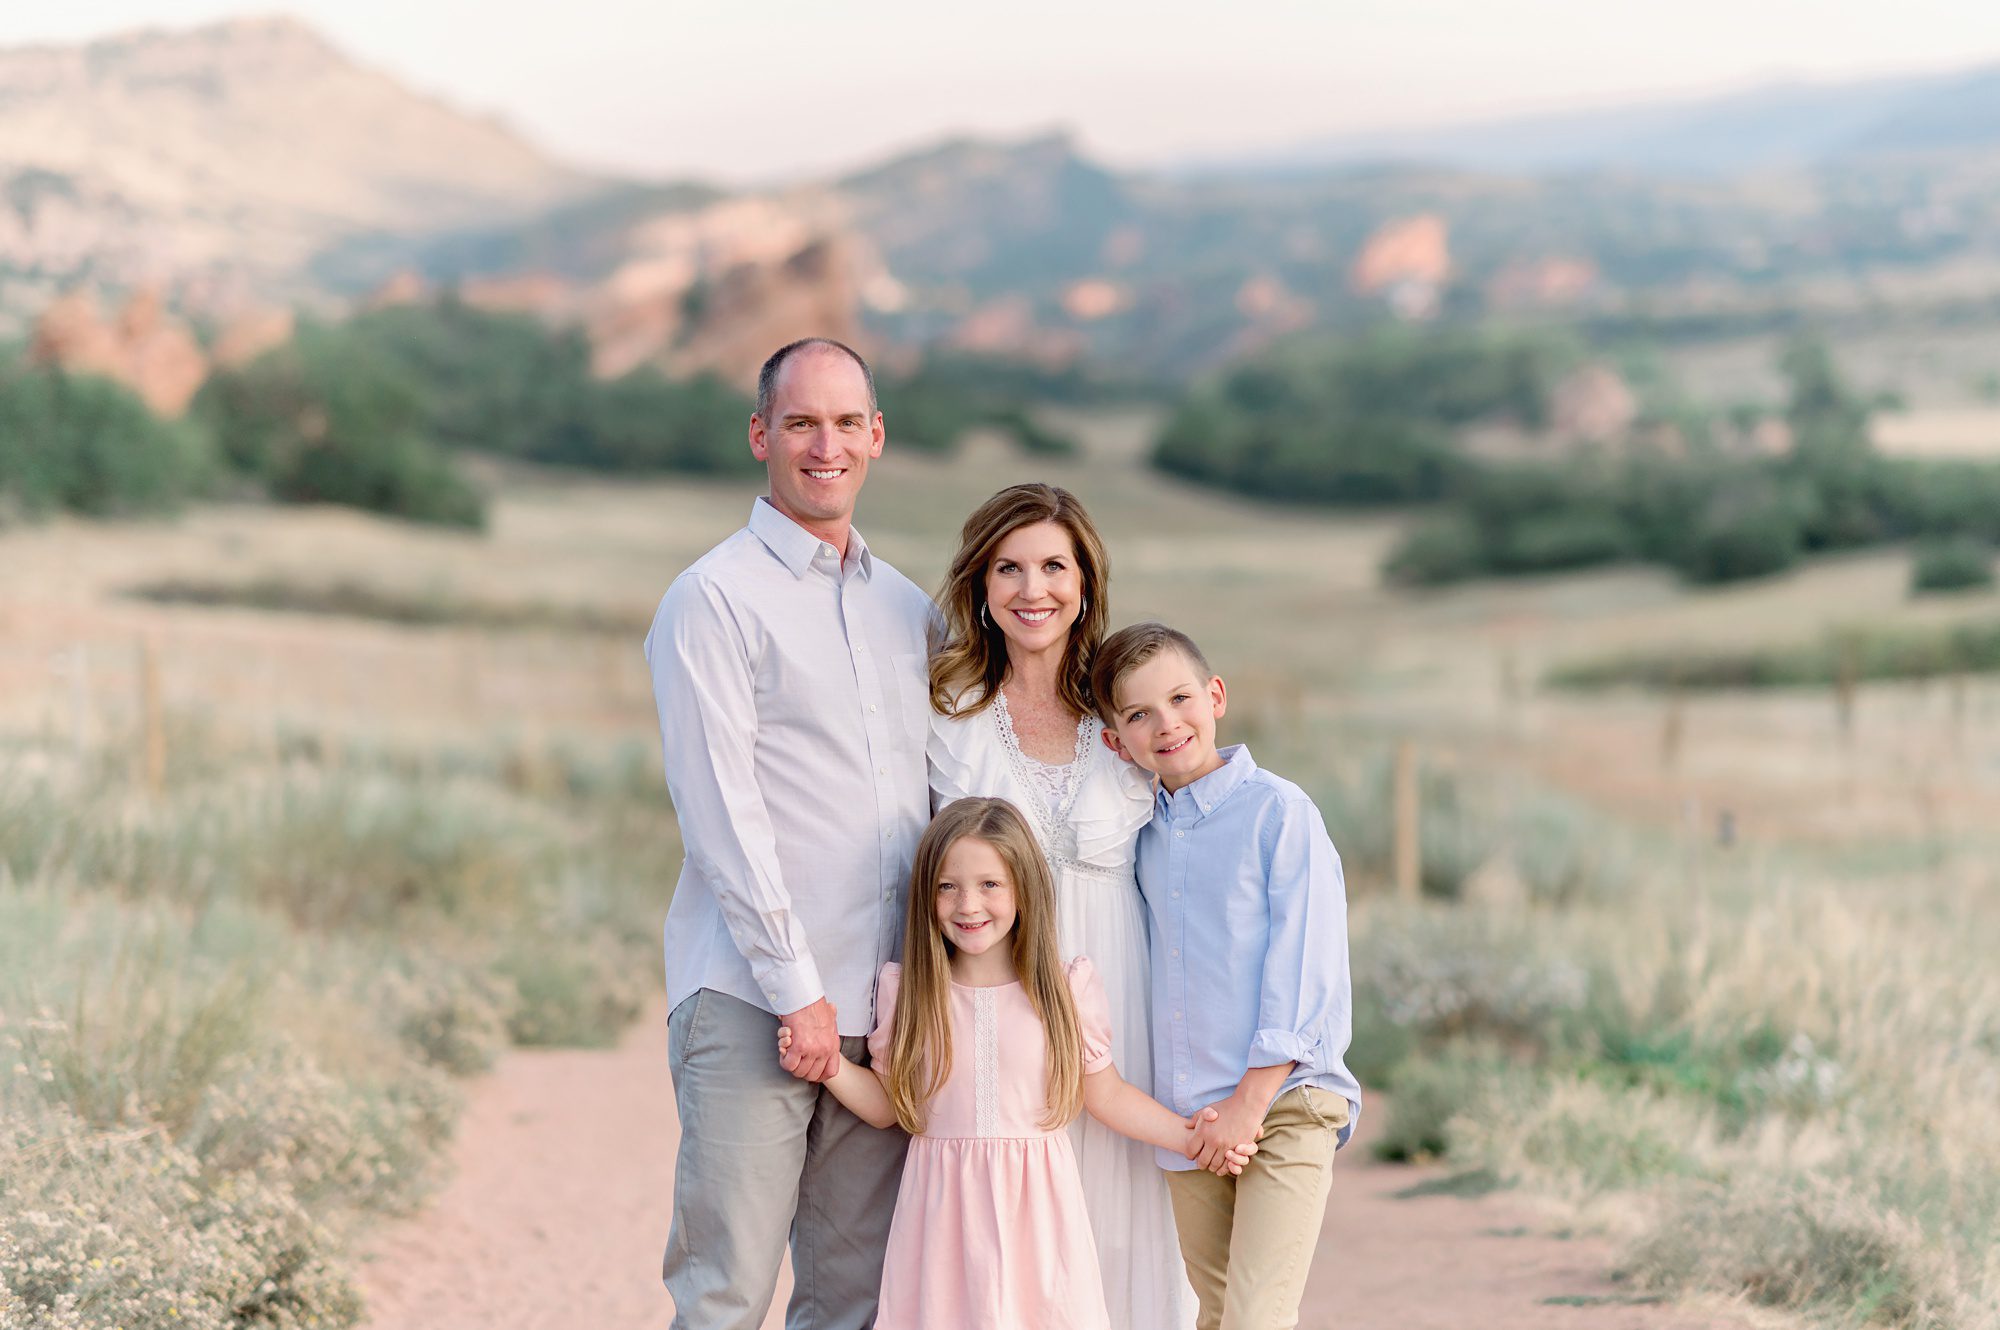 Family of four gets fun natural portraits done at south valley park in Littleton, Colorado